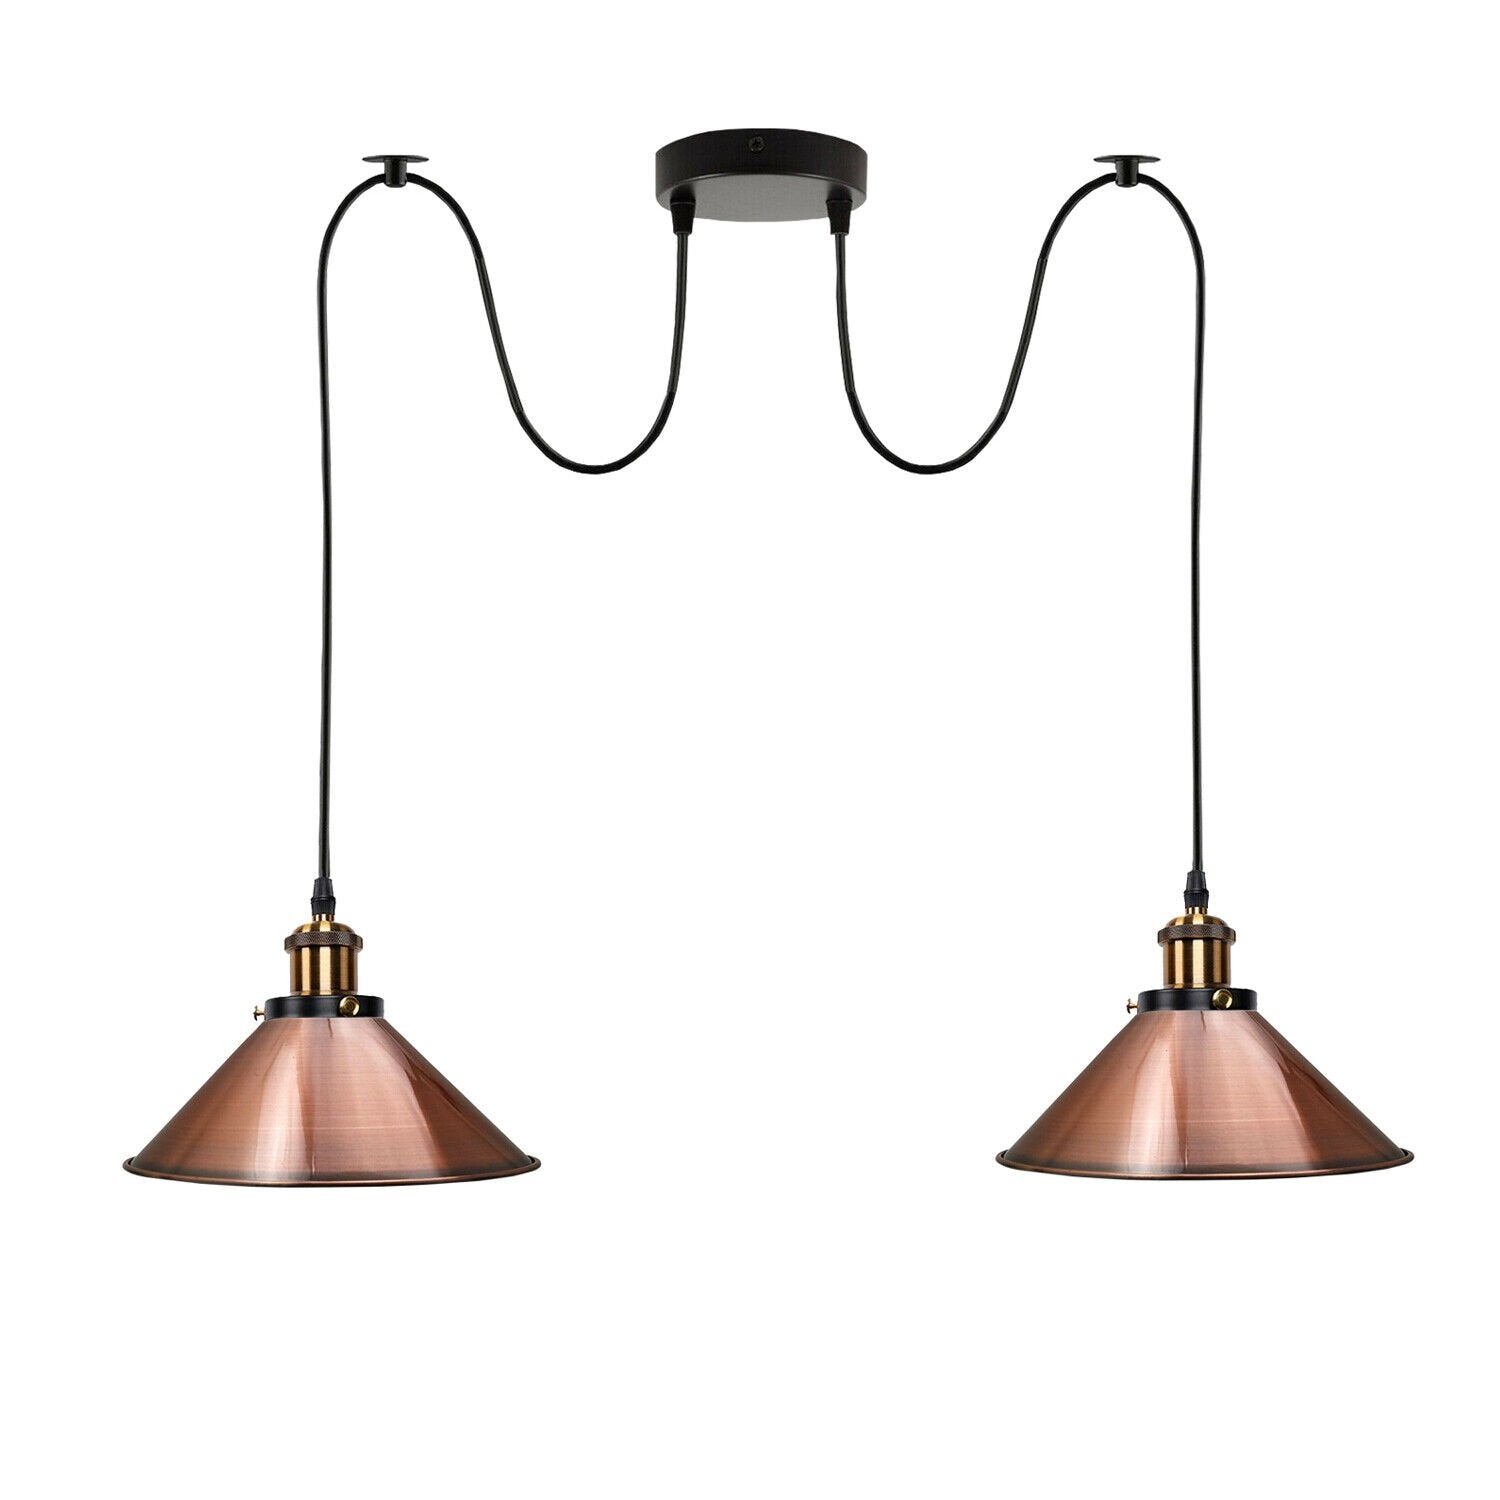  2 way hanging pendant Light without Bulb